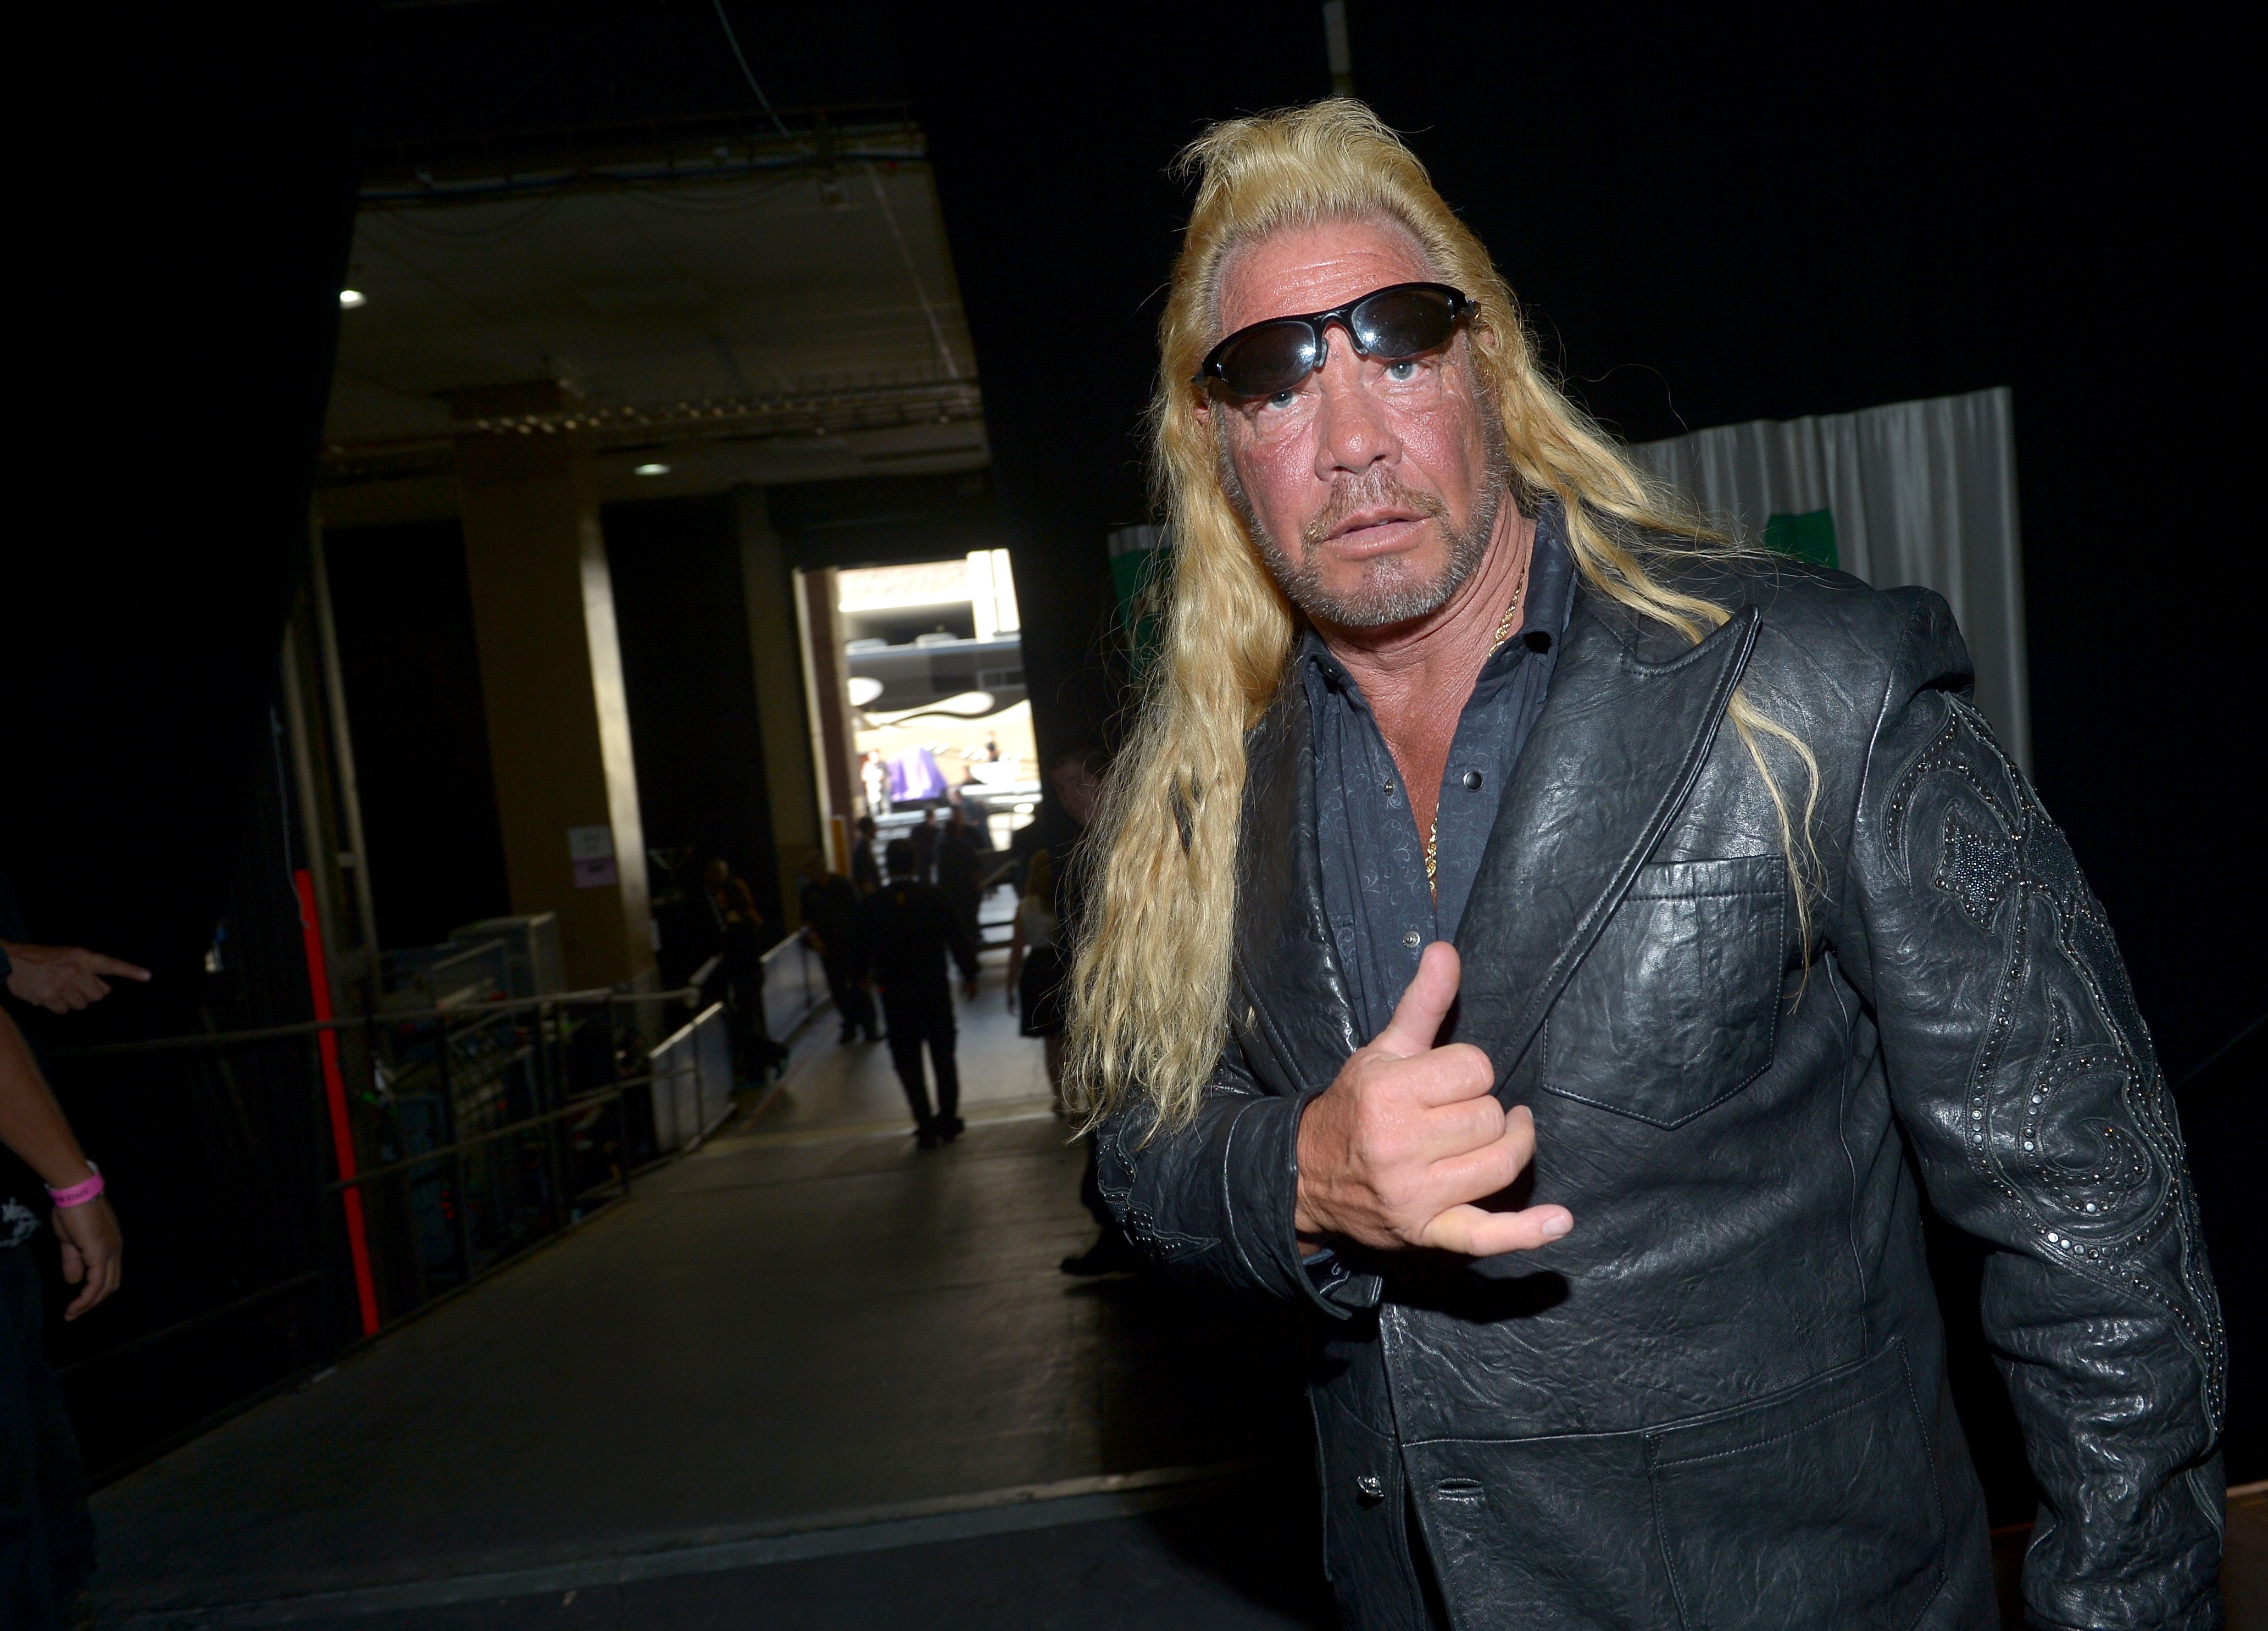 Dog the Bounty Hunter at the 48th Annual Academy of Country Music Awards at the MGM Grand Garden Arena on April 7, 2013 | Photo: Getty Images